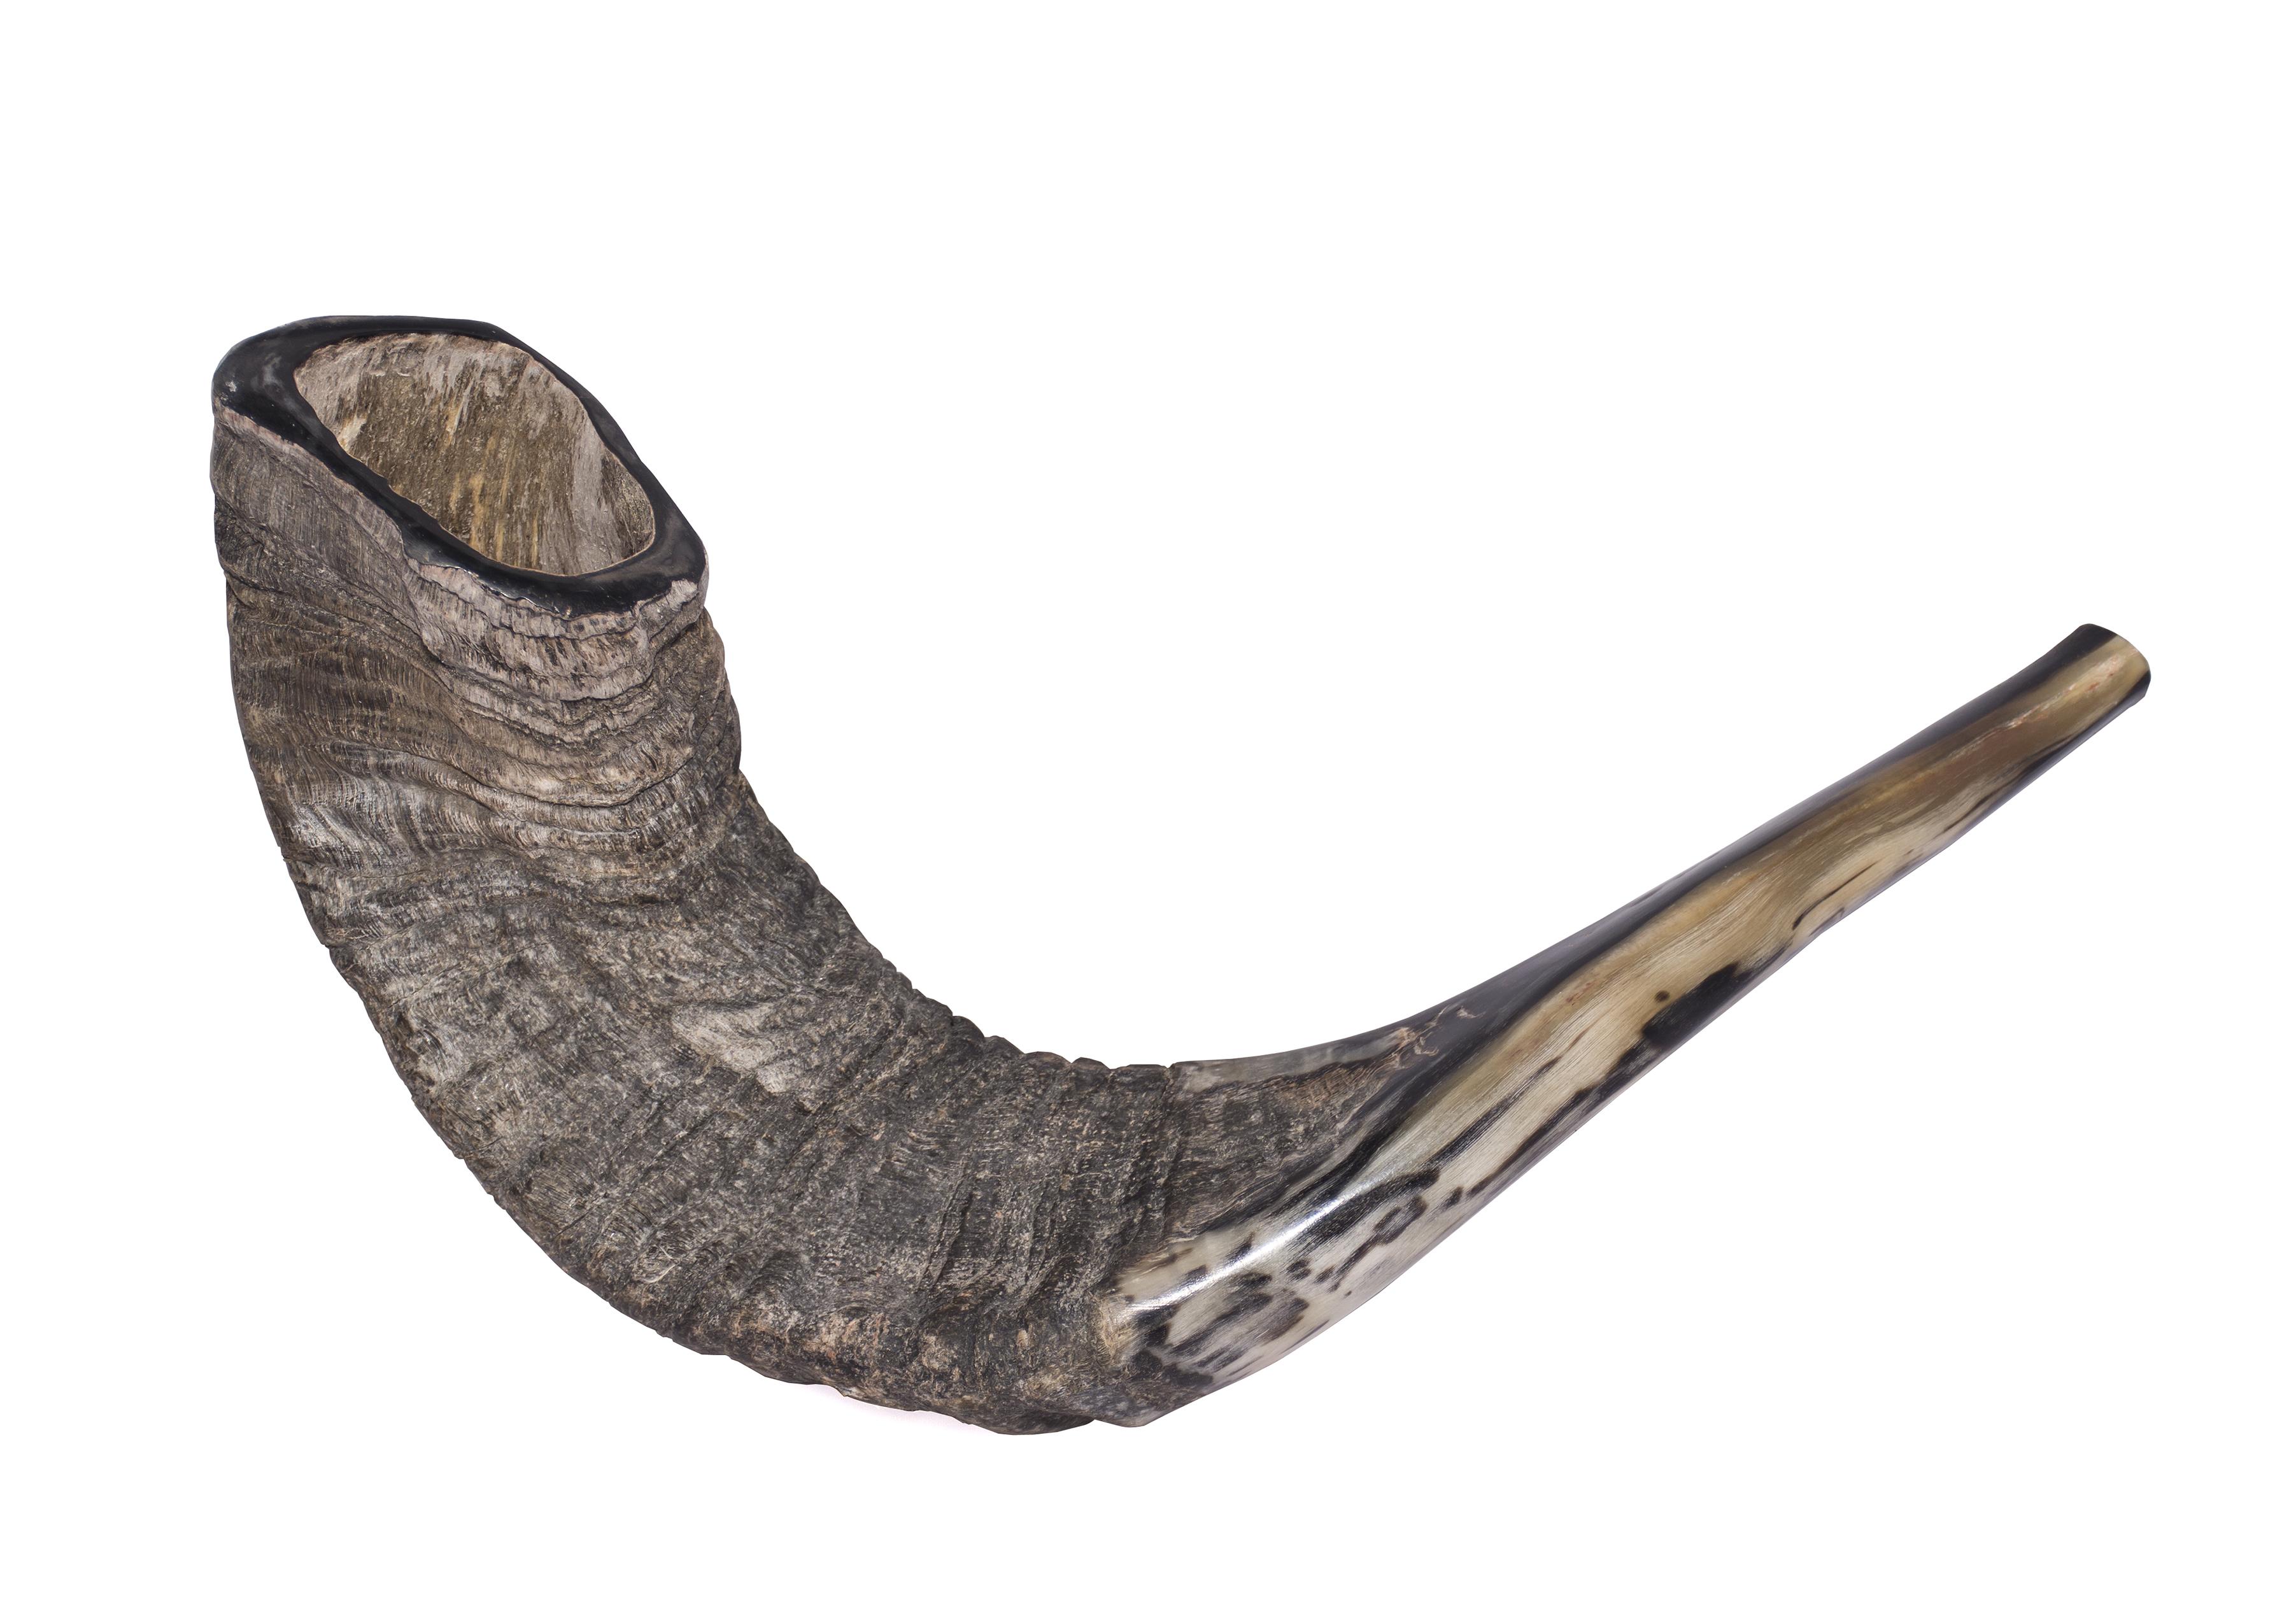 Kosher Ram Shofar Horn from Israel 12”-14 Traditional Half Polished Ram Shofar Smooth Mouthpiece for Easy Blowing Clear Sound Shofar Holy Land Easy Blowing Ancient Jewish Musical Instrument 